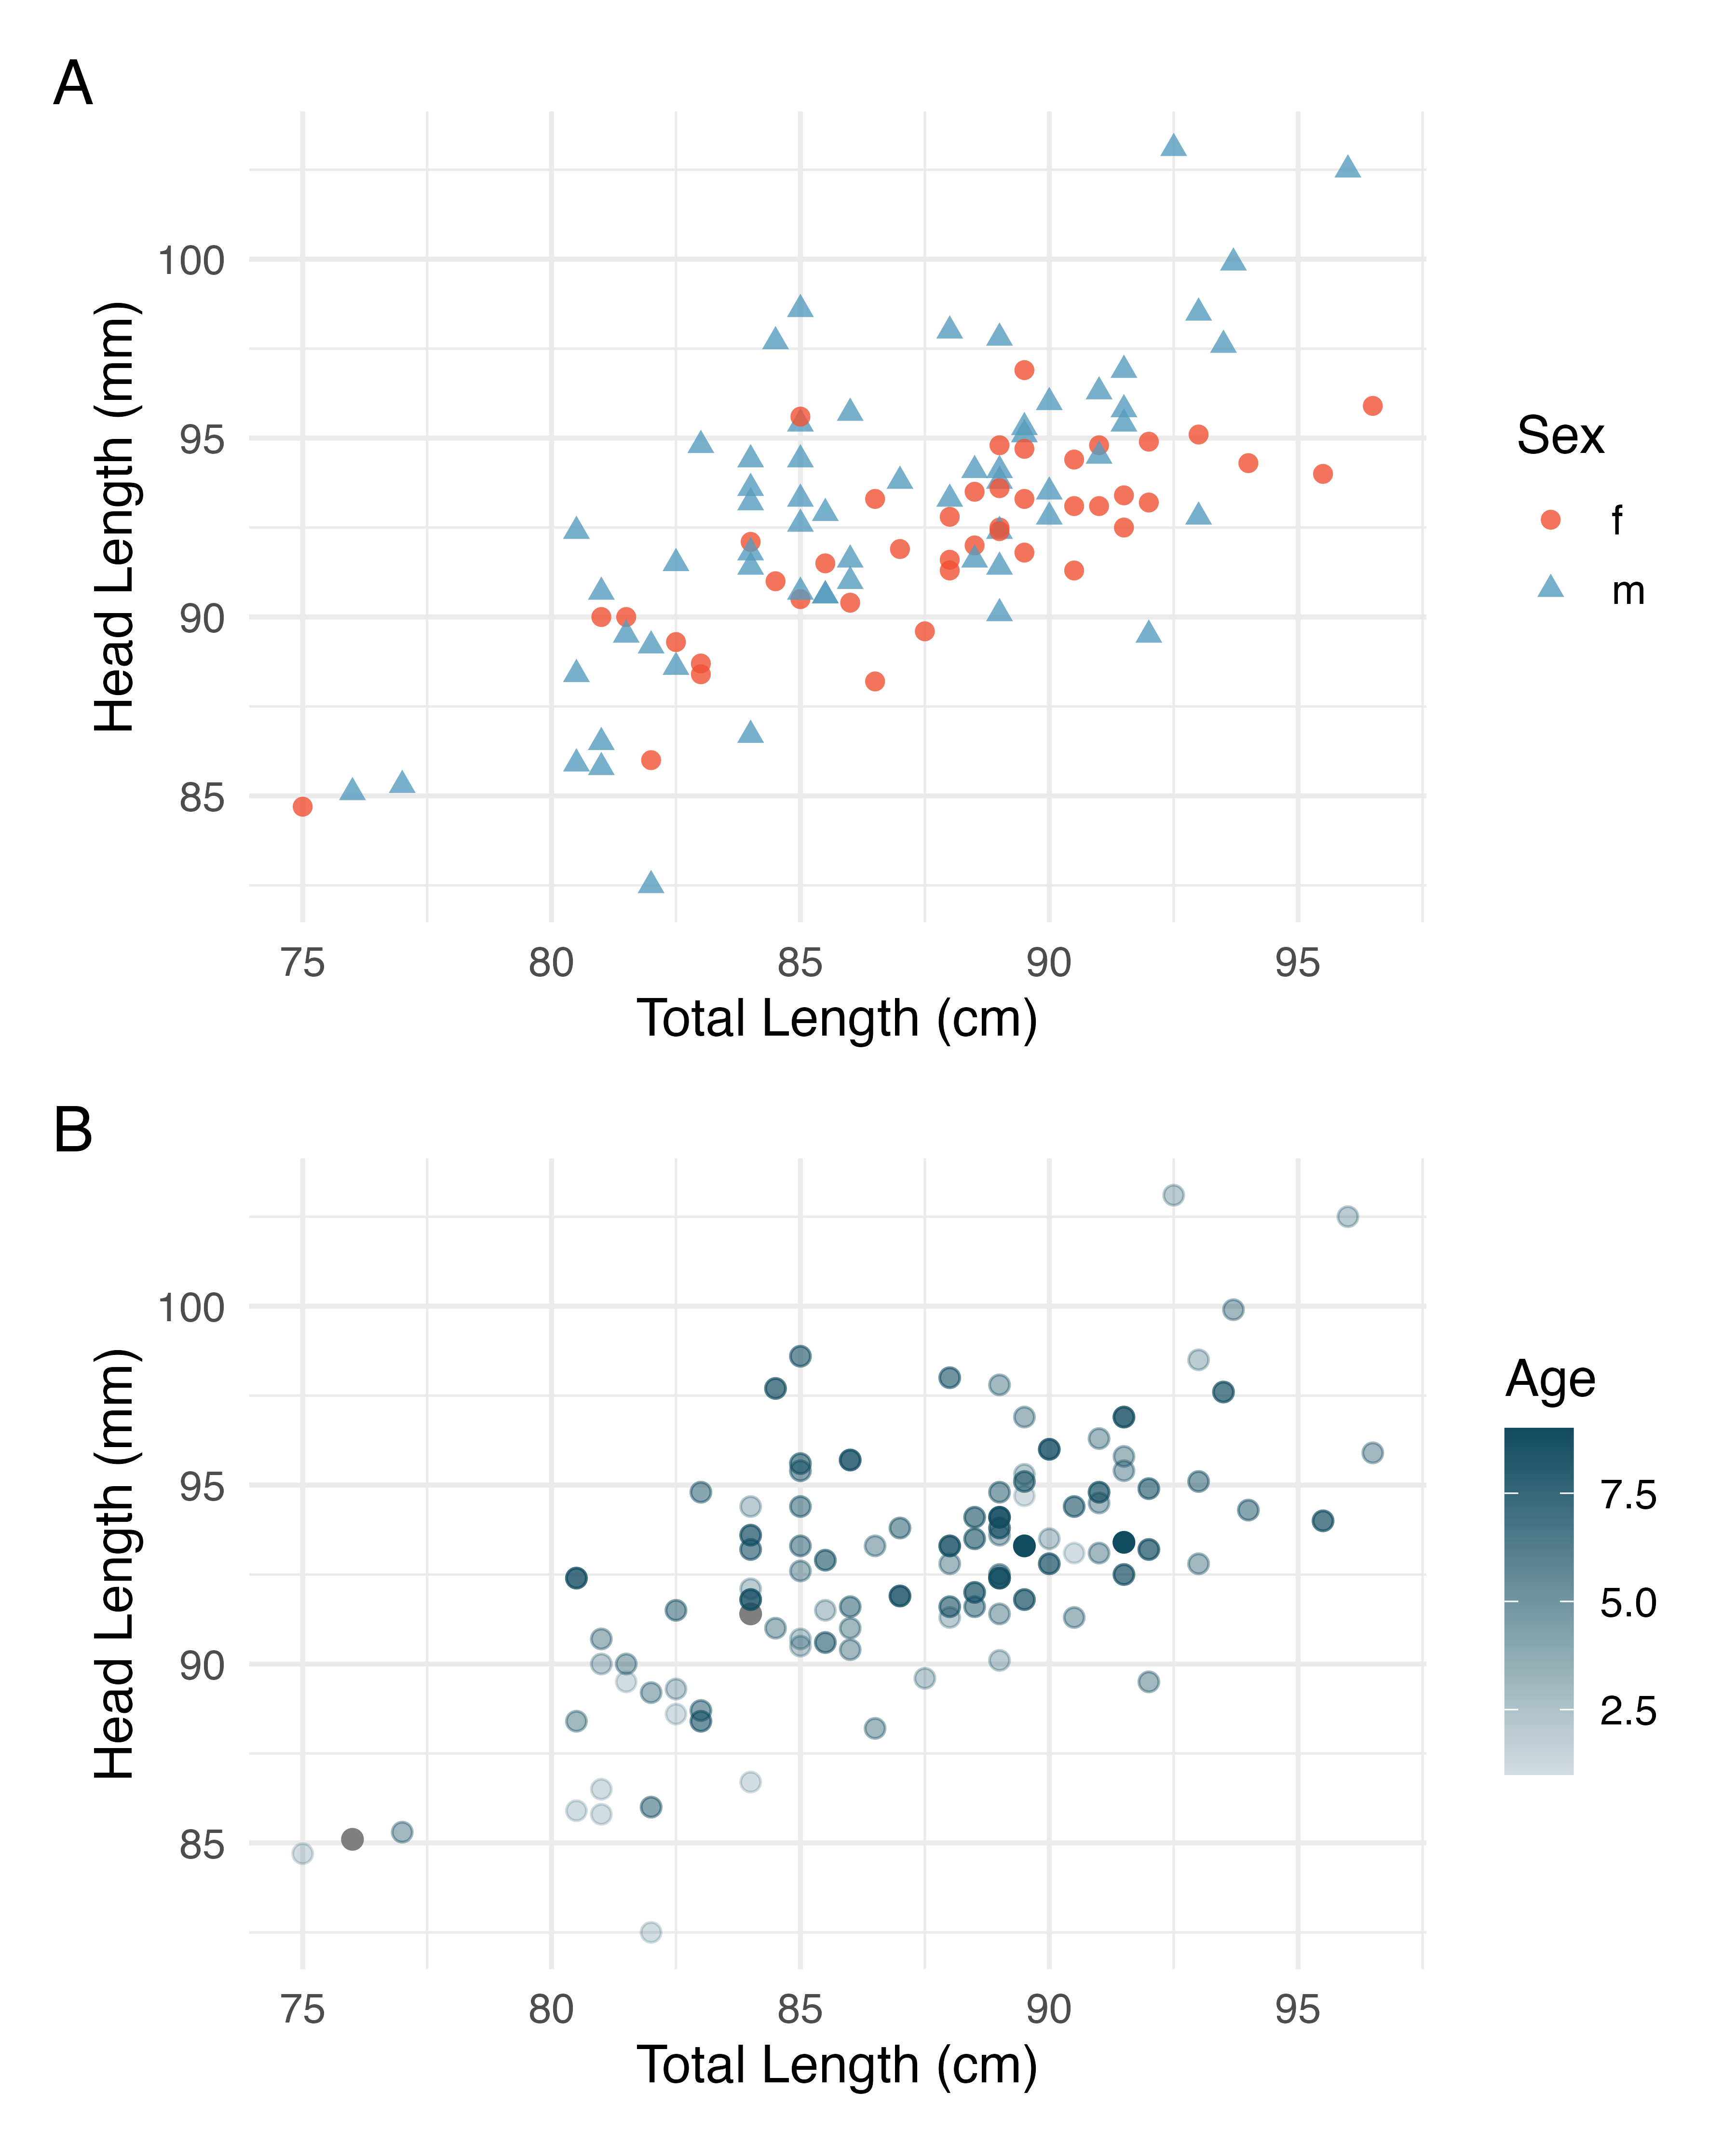 Relationship between total length and head length of brushtail possums, taking into consideration their sex (Plot A) or age (Plot B).